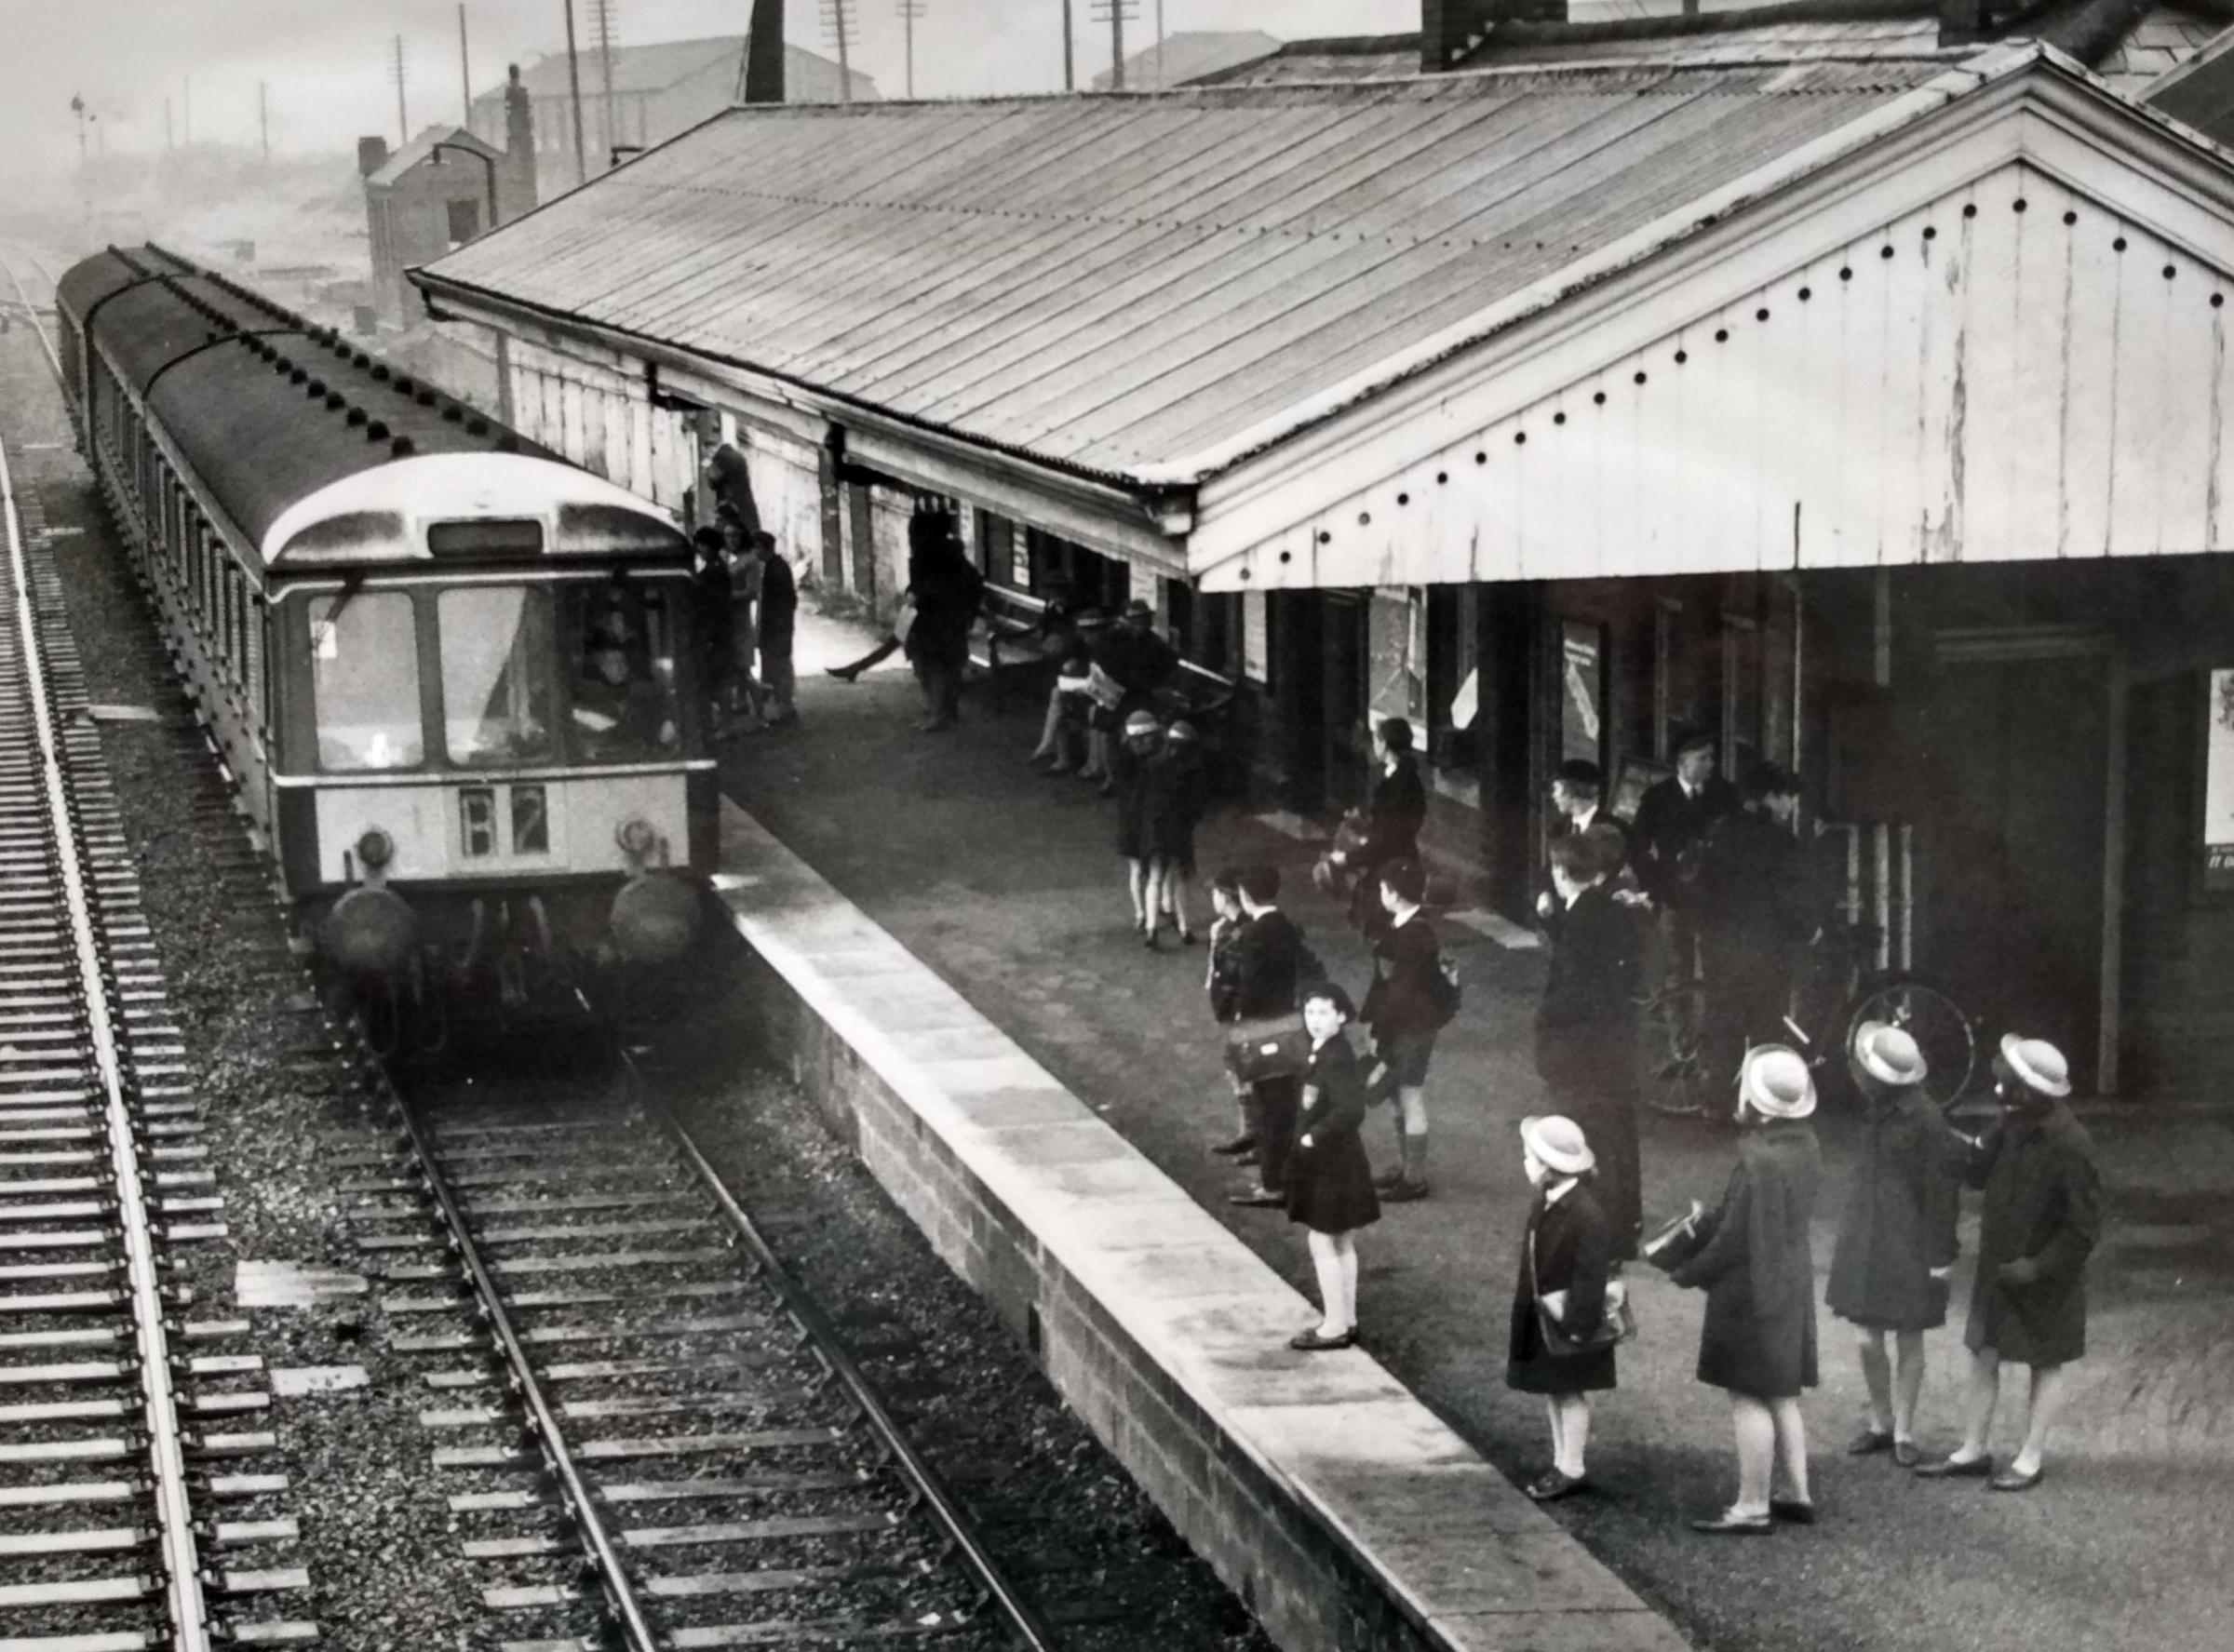 This charming picture of schoolchildren ready to board the arriving train at Pershore station was taken in December 1967